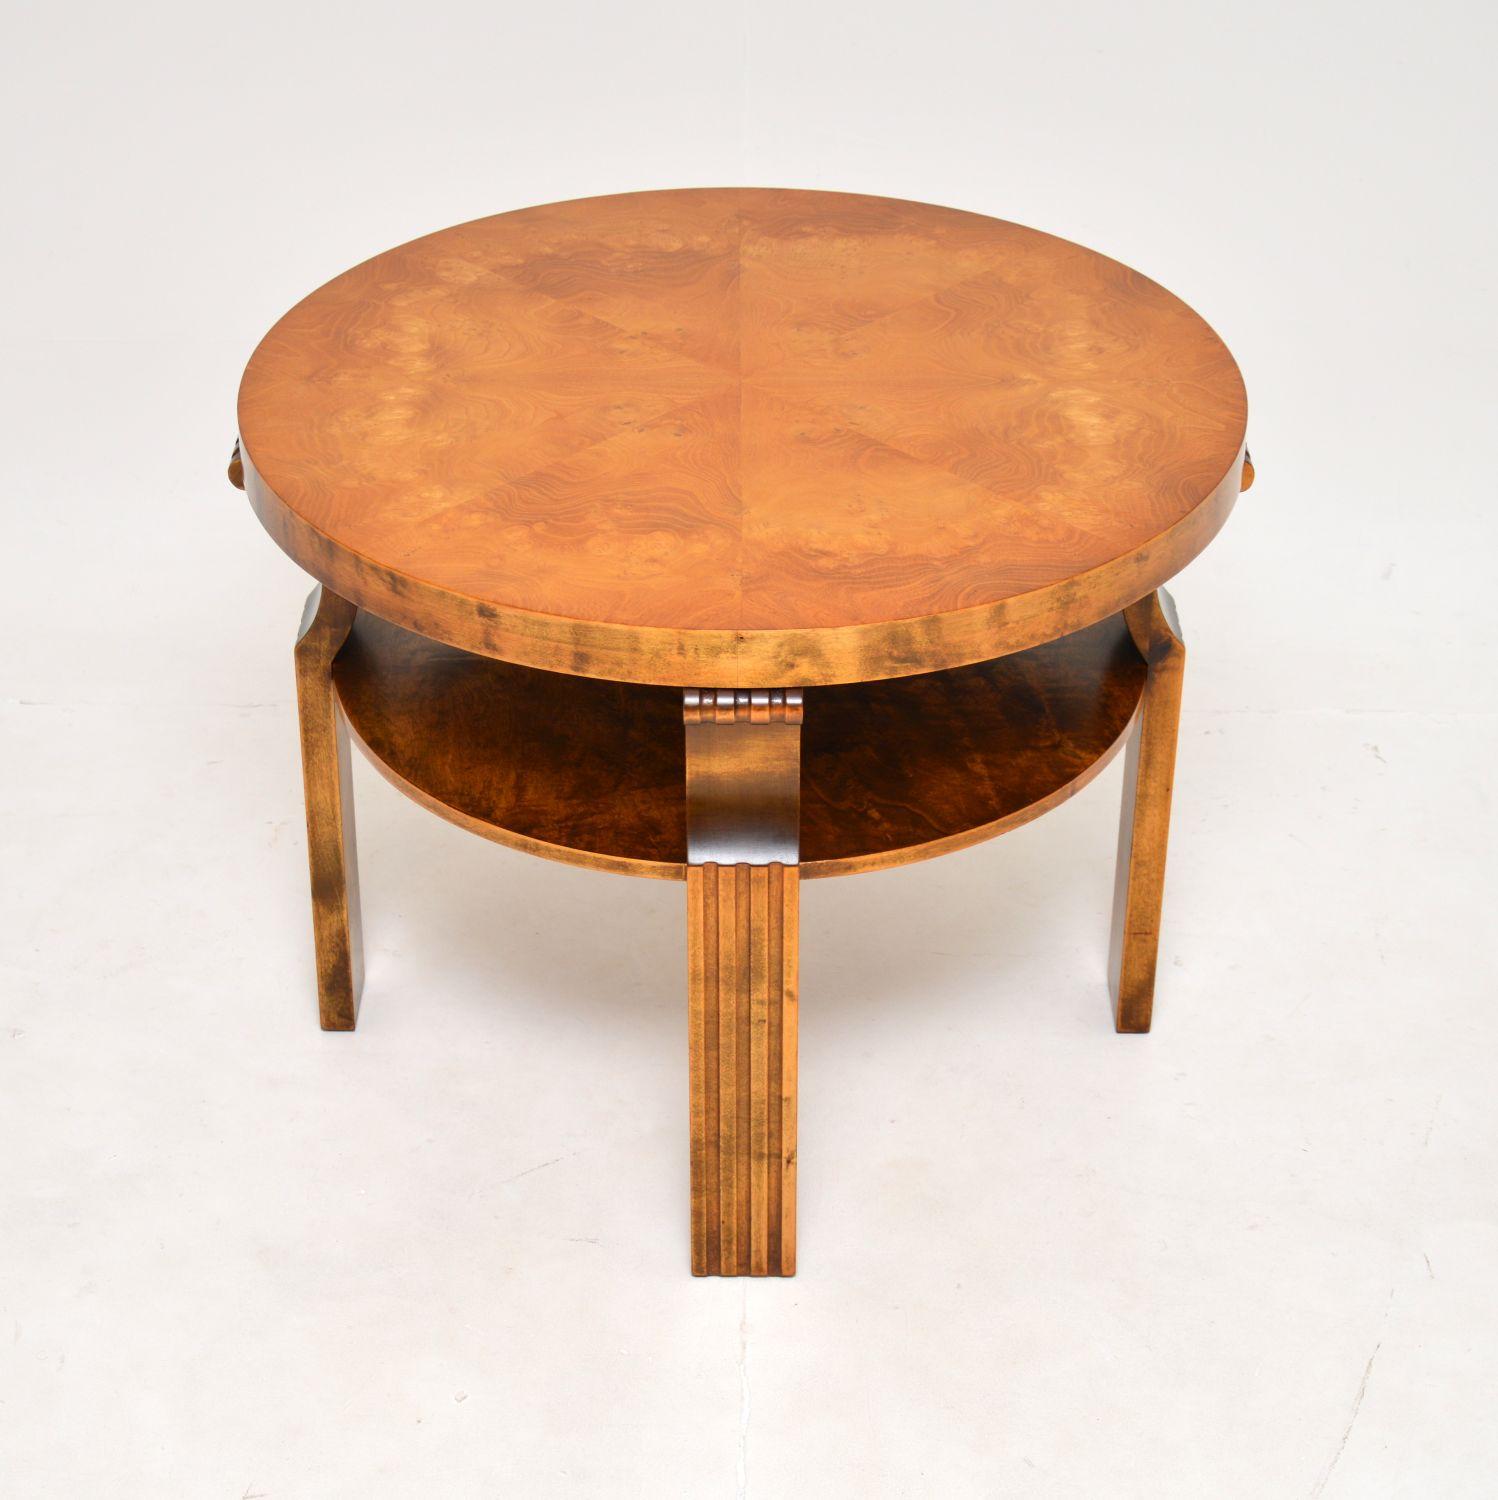 A stunning Scandinavian Art Deco satin birch coffee table, this was made in Norway and dates from the 1920’s.

It is of superb quality and is a great size, with large circular top and useful lower tier. This is mostly constructed from solid satin